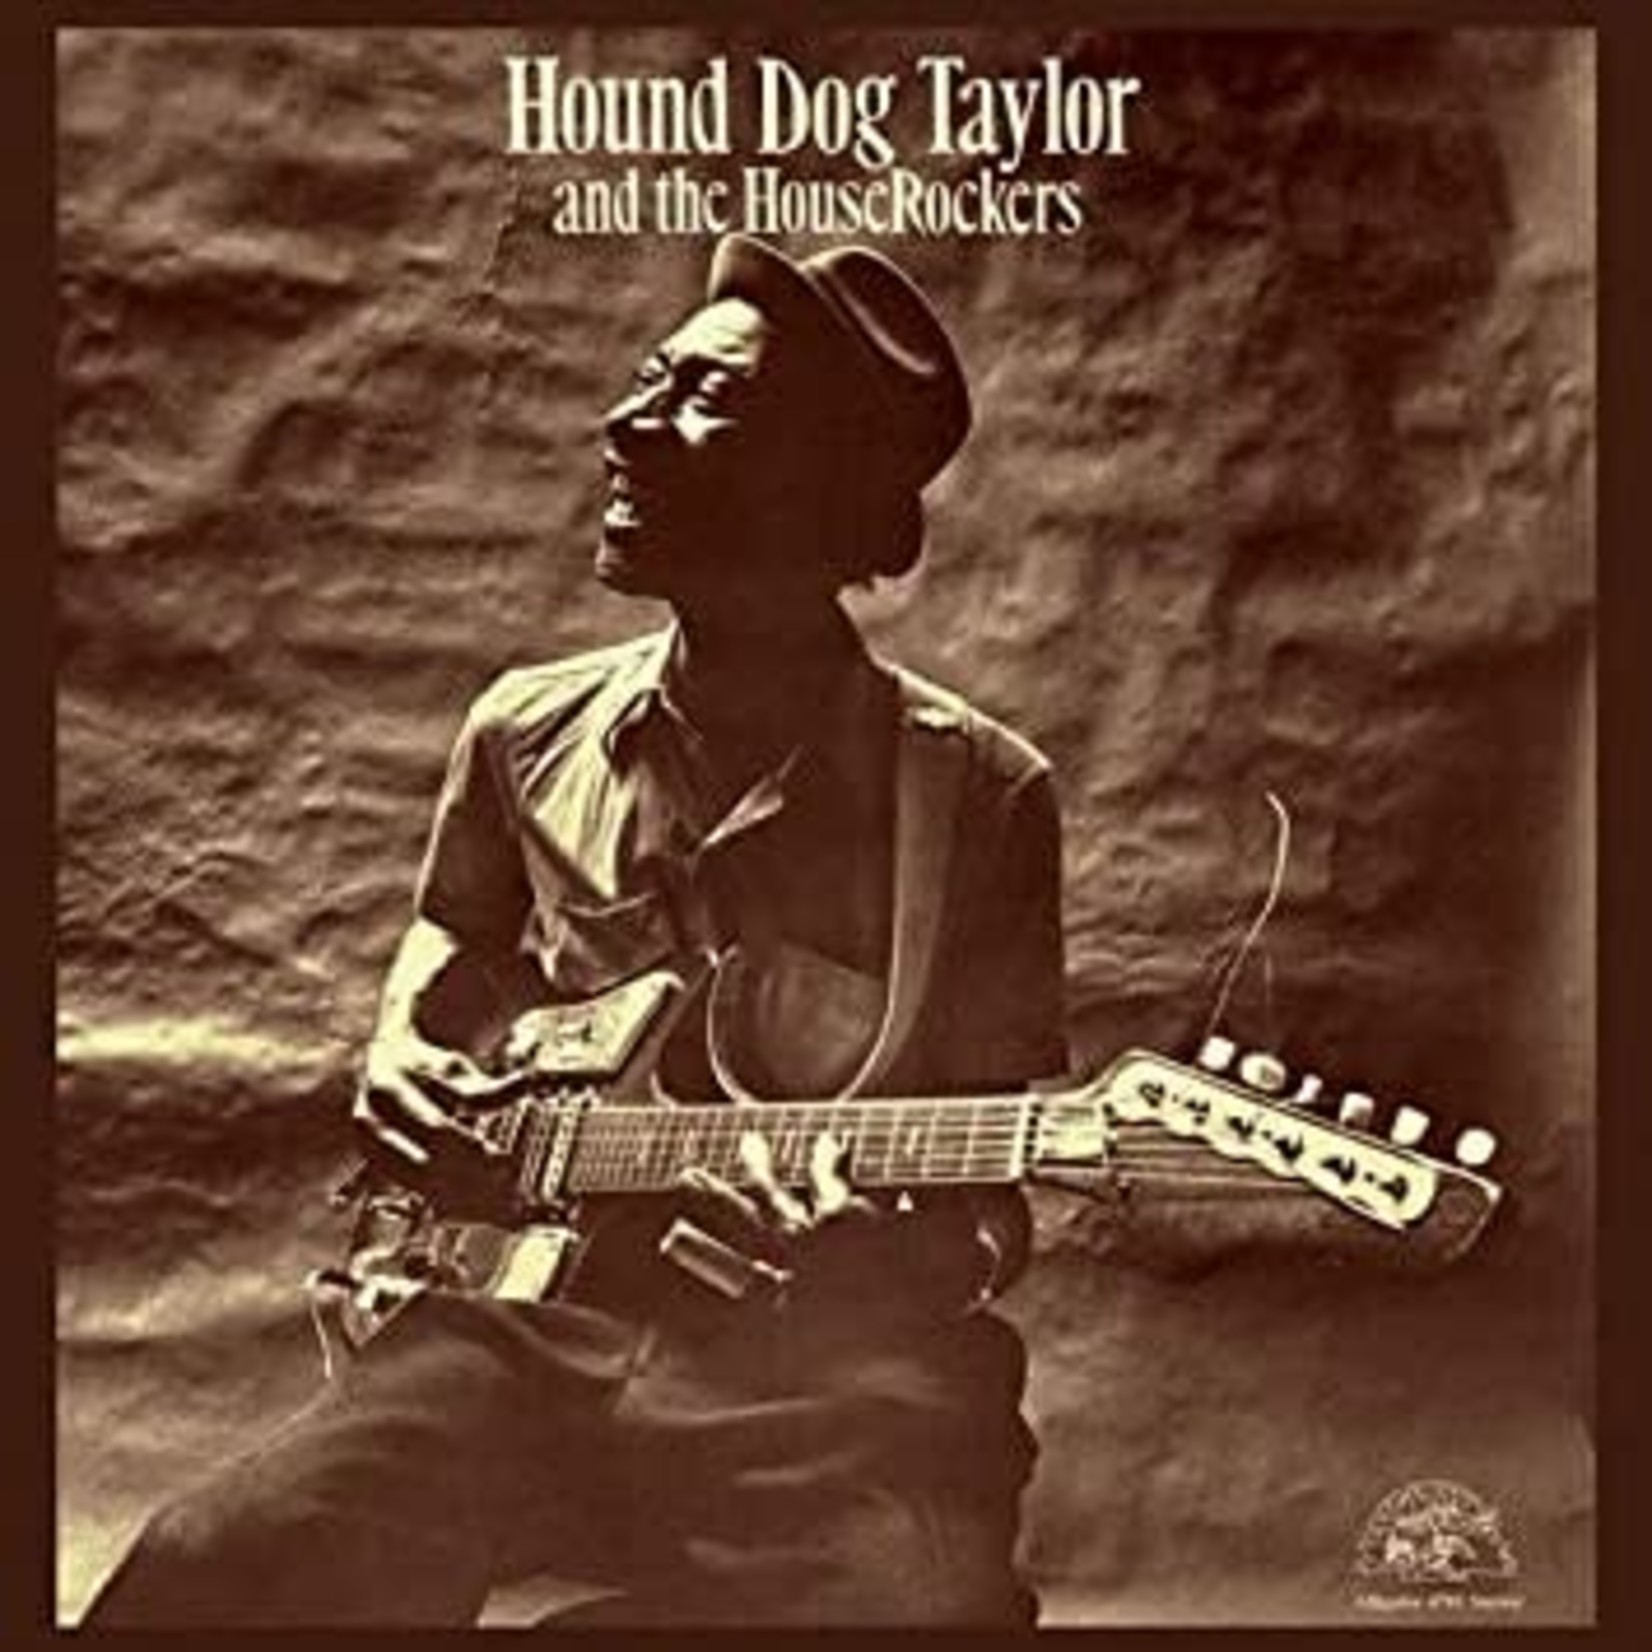 Hound Dog Taylor - Hound Dog Taylor And The House Rockers